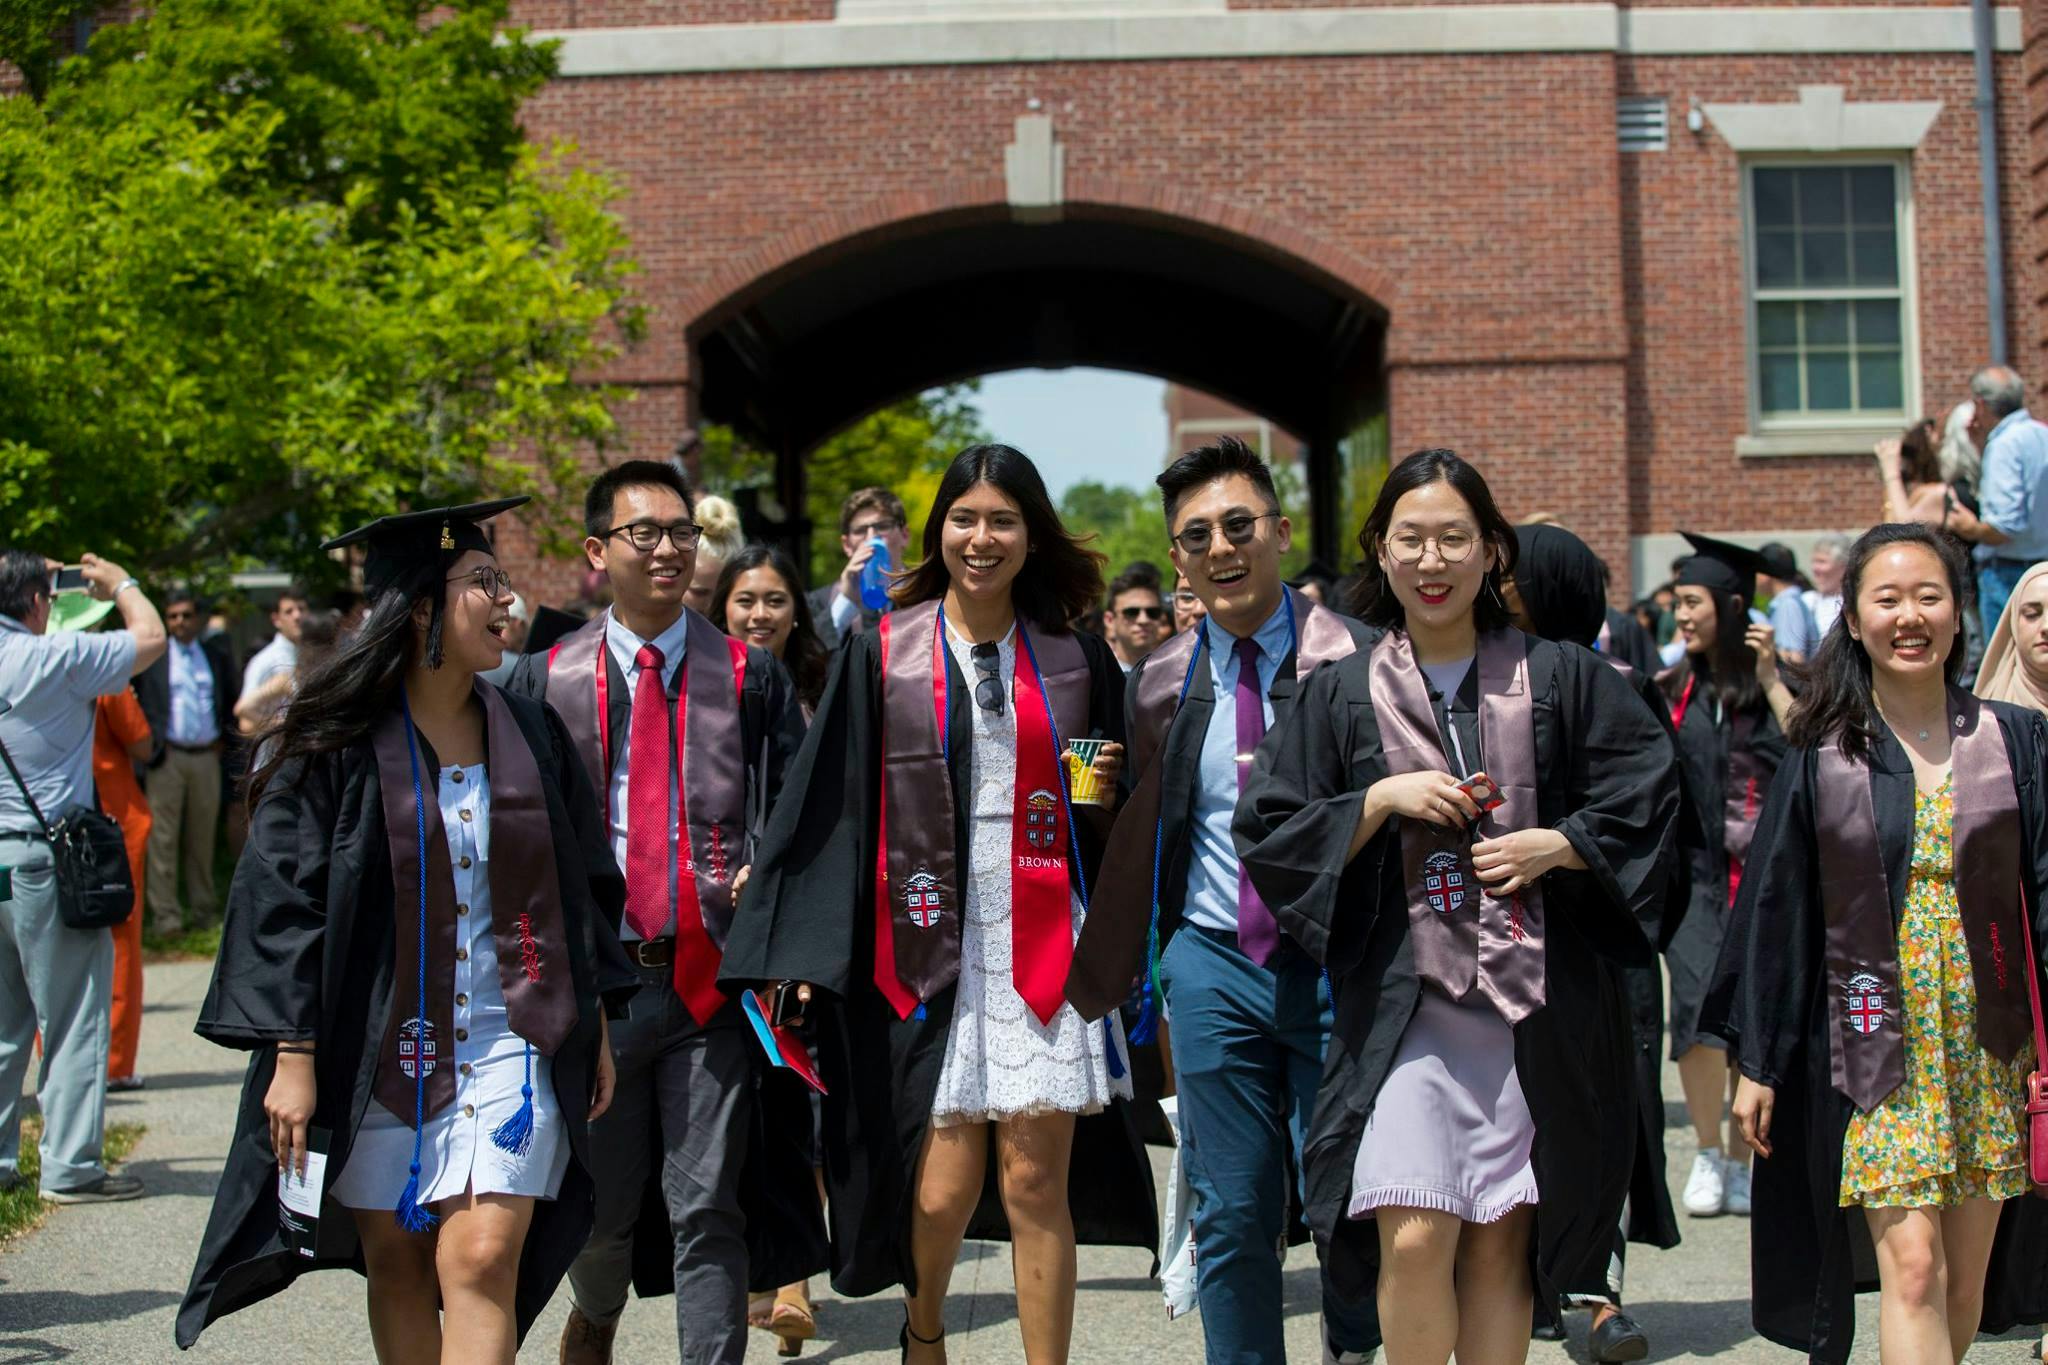 A group of students walking at Brown University wearing graduation gowns.